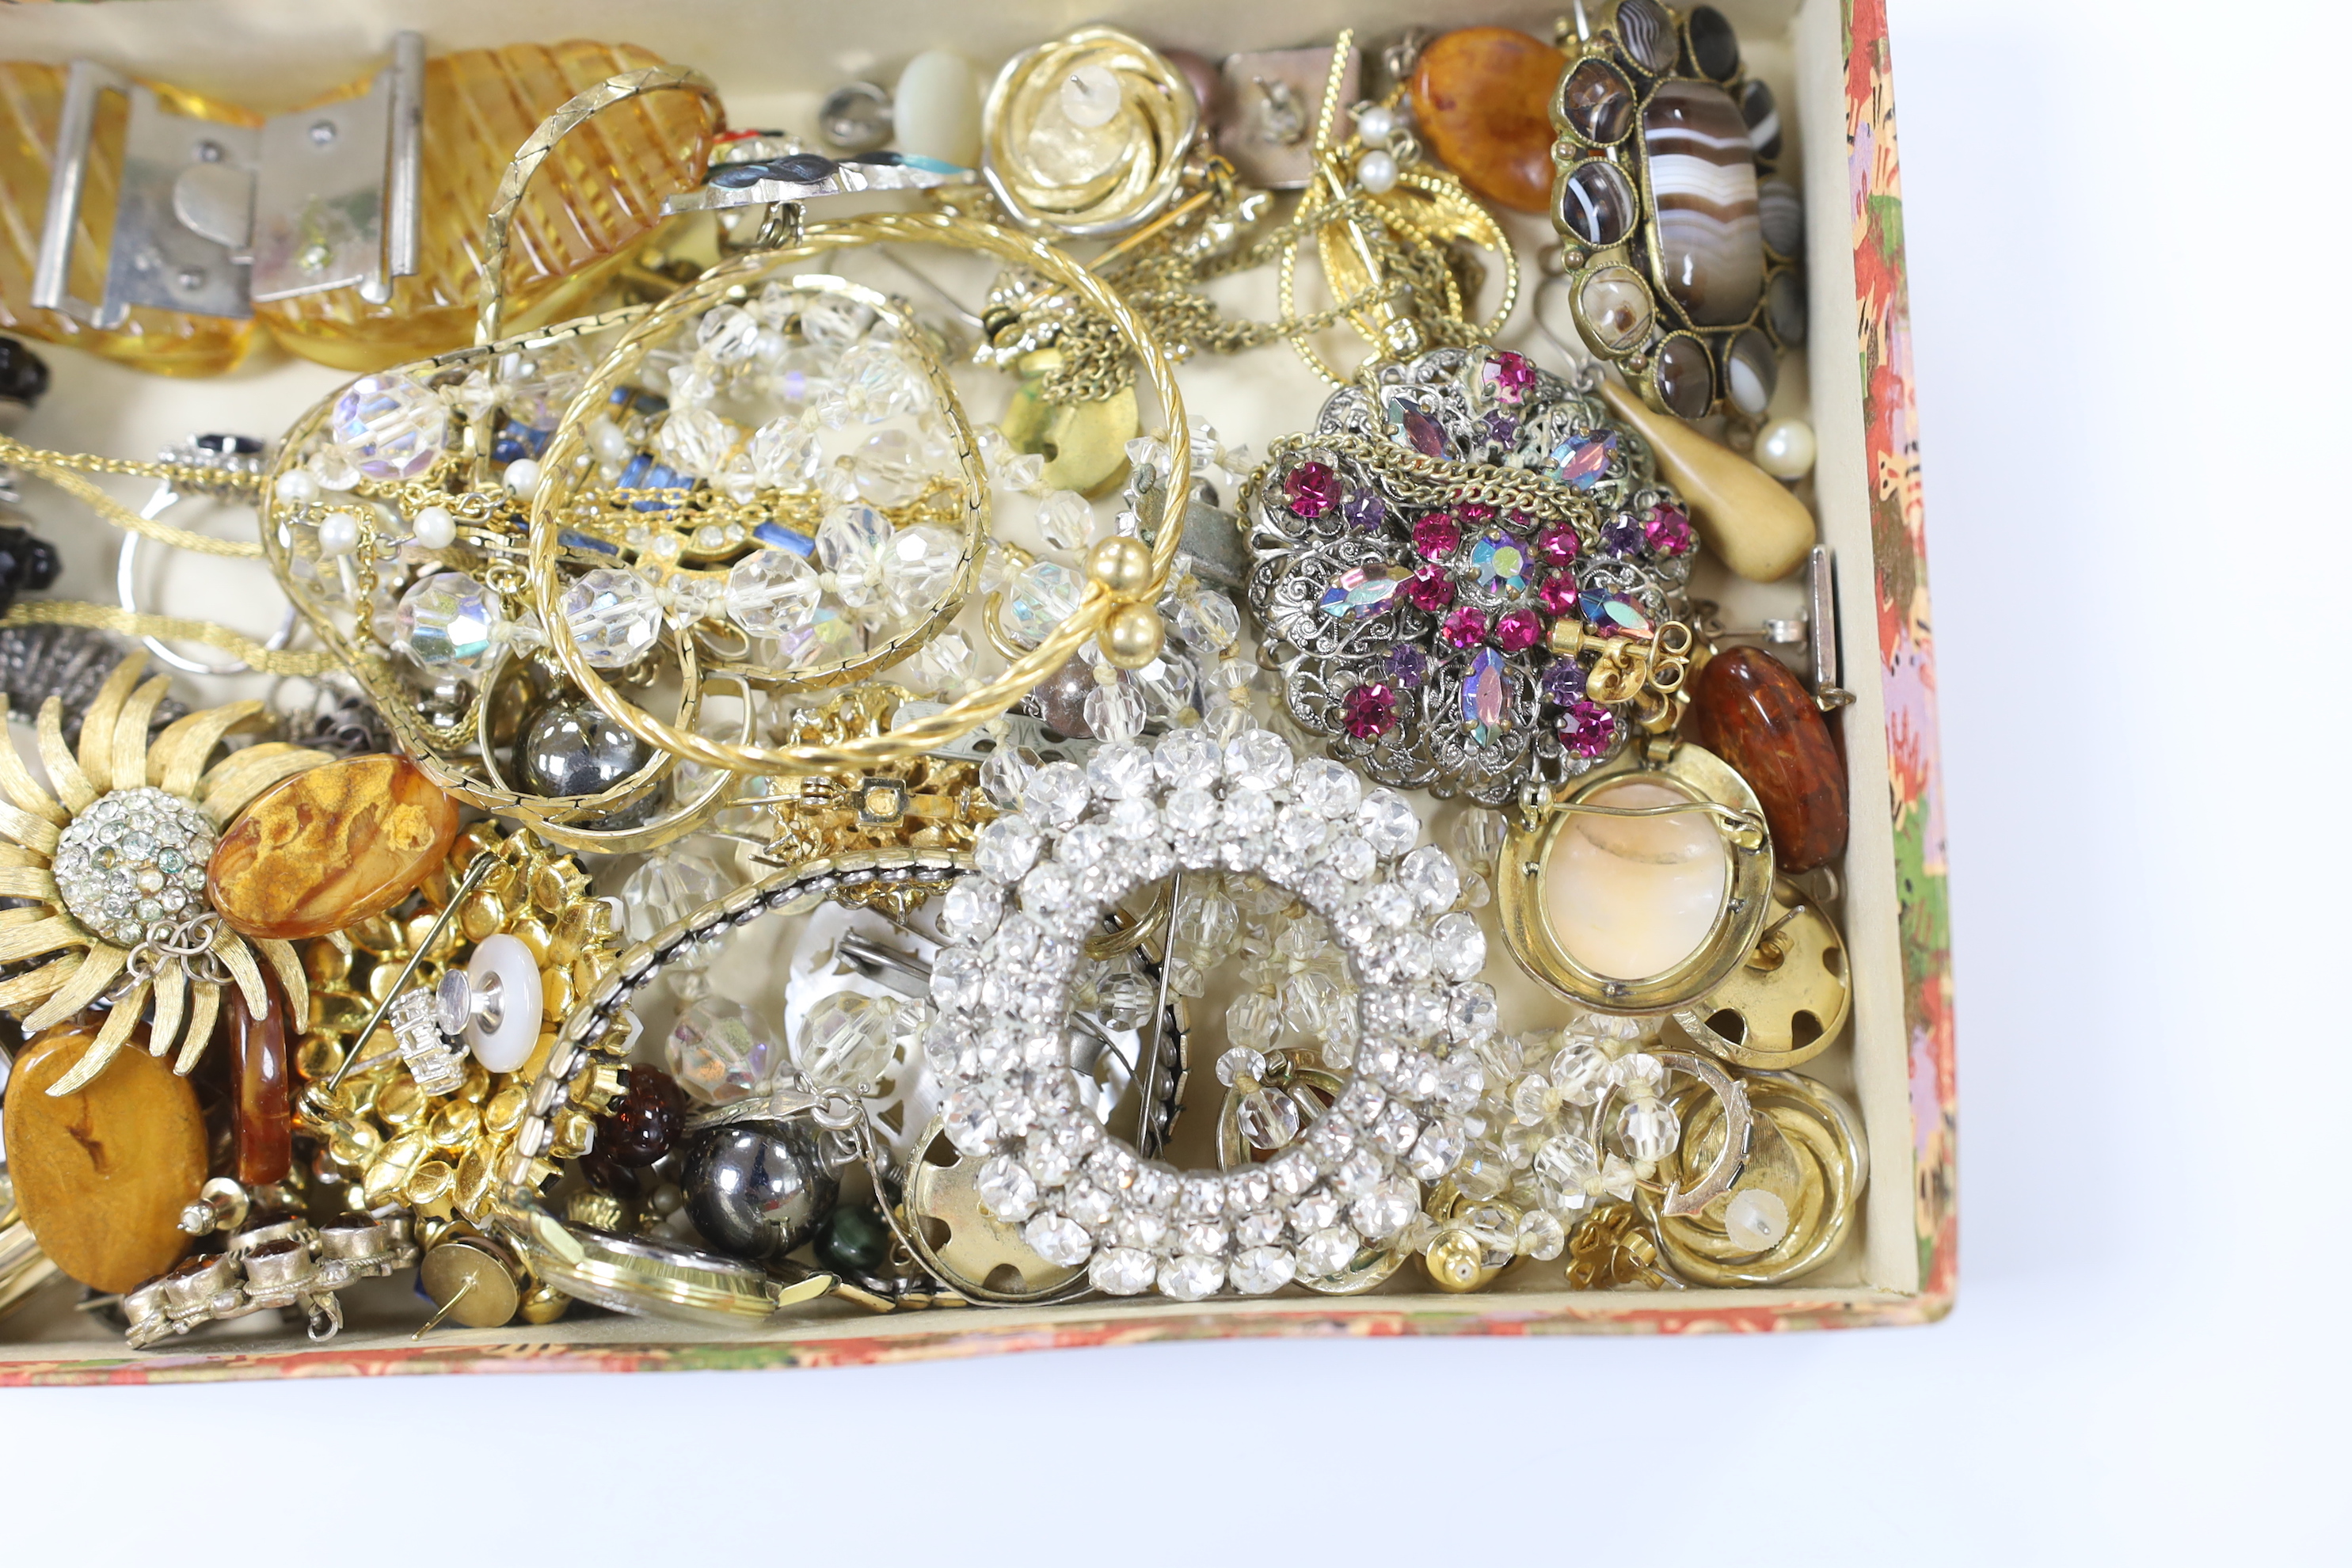 Assorted costume jewellery and wrist watches, including an agate set brooch.